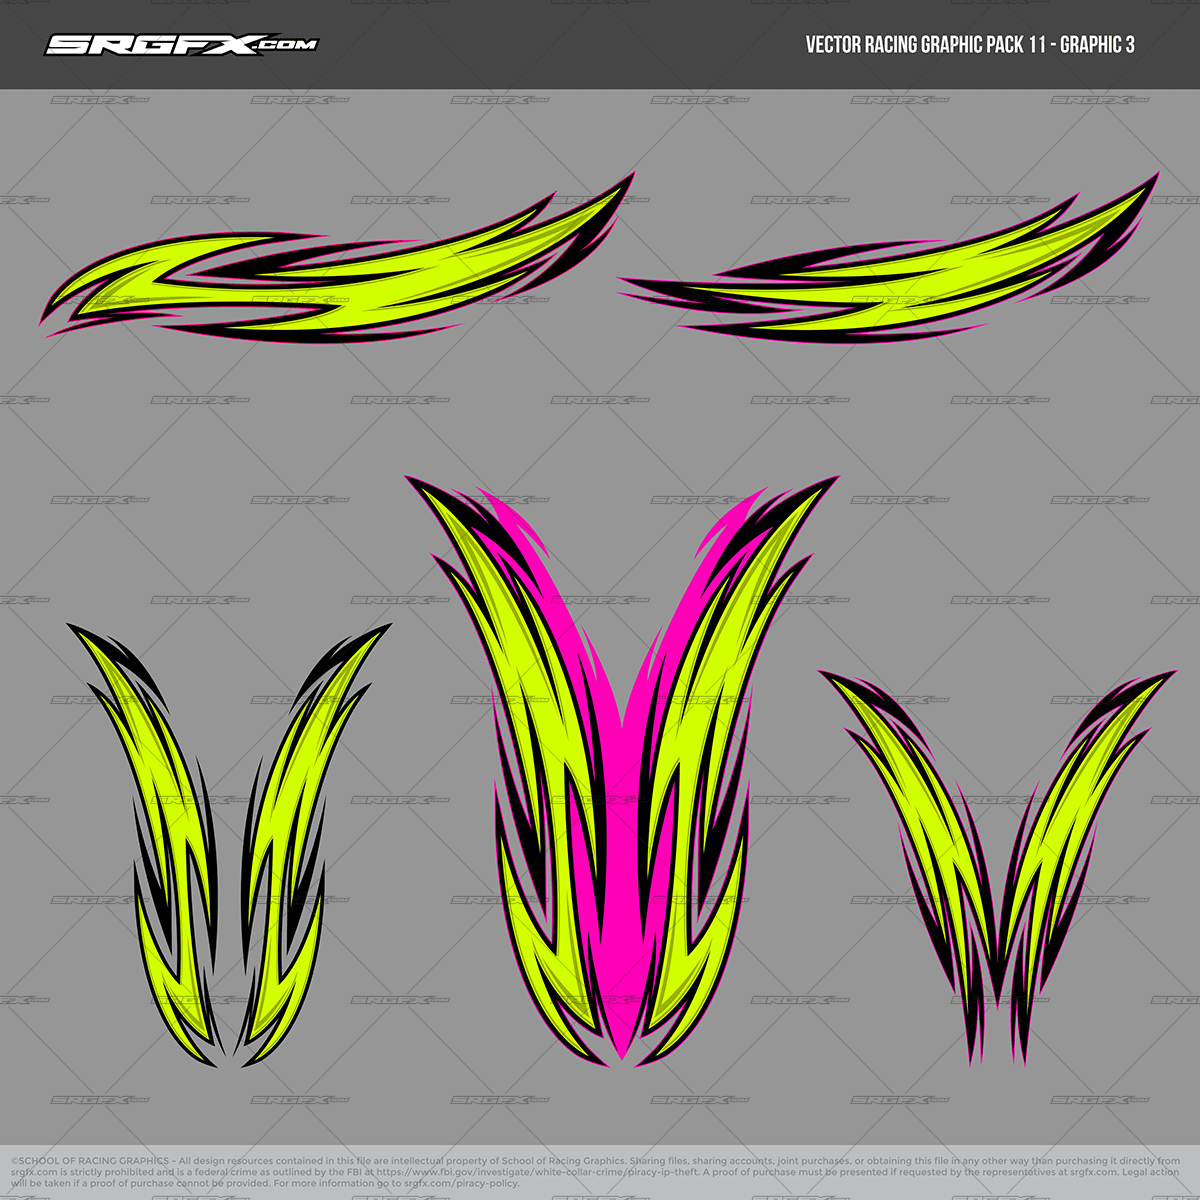 SRGFX Vector Racing Graphic Pack 11